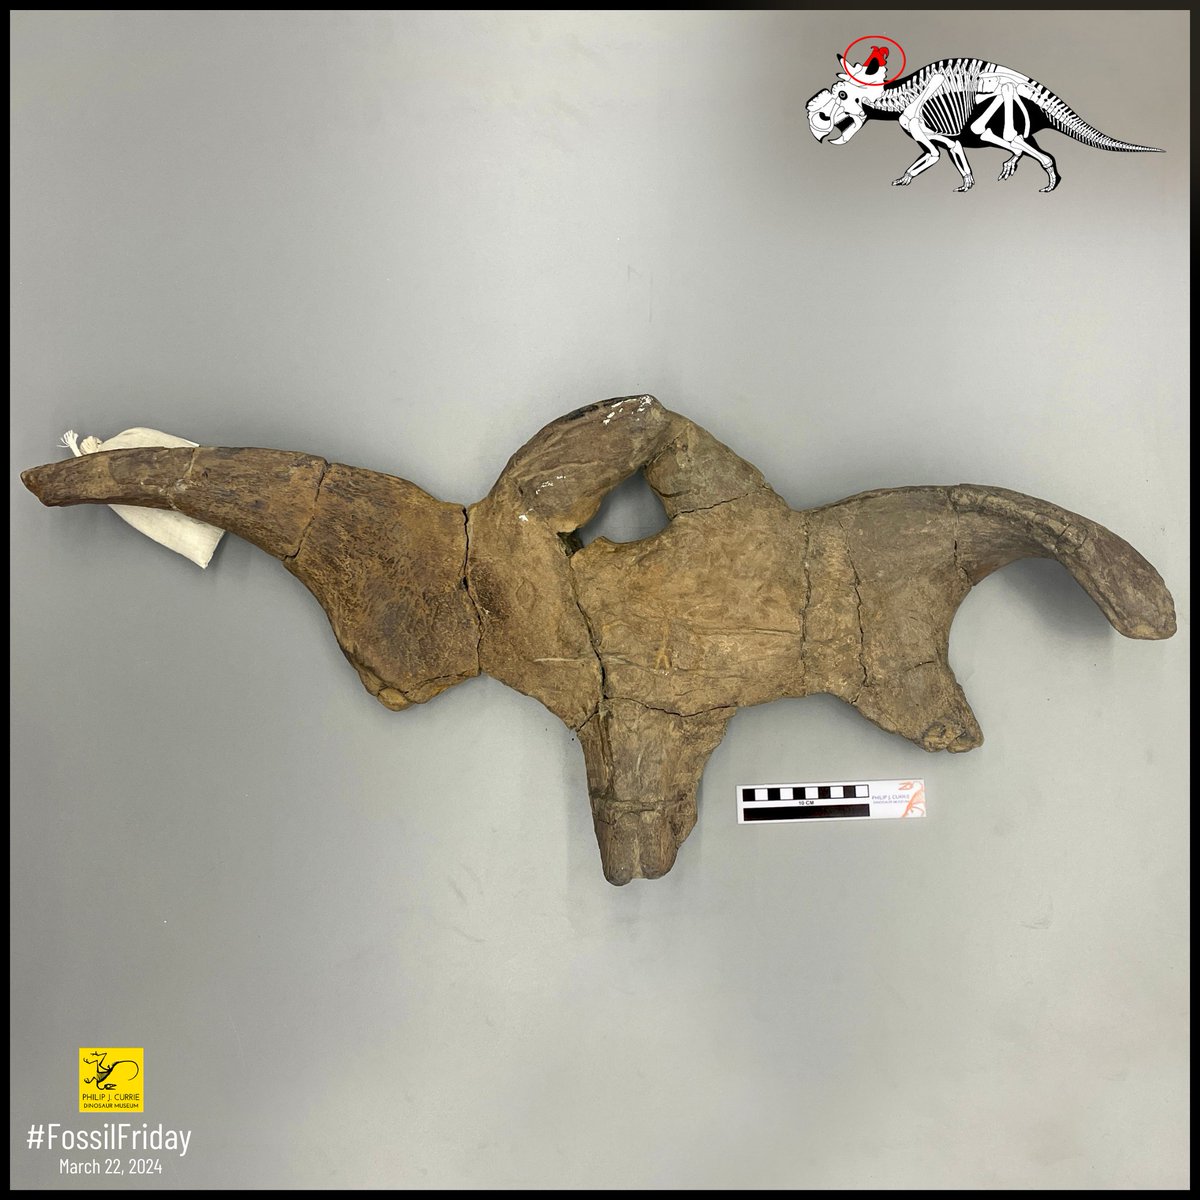 #FossilFriday! Like most other ceratopsians, Pachyrhinosaurus have very extravagant frills. This parietal bar was found in 2022 and shows how variable the horns at the top of the frill can be. Each frill is unique and shows a different mix of horn length, width, and curvature.